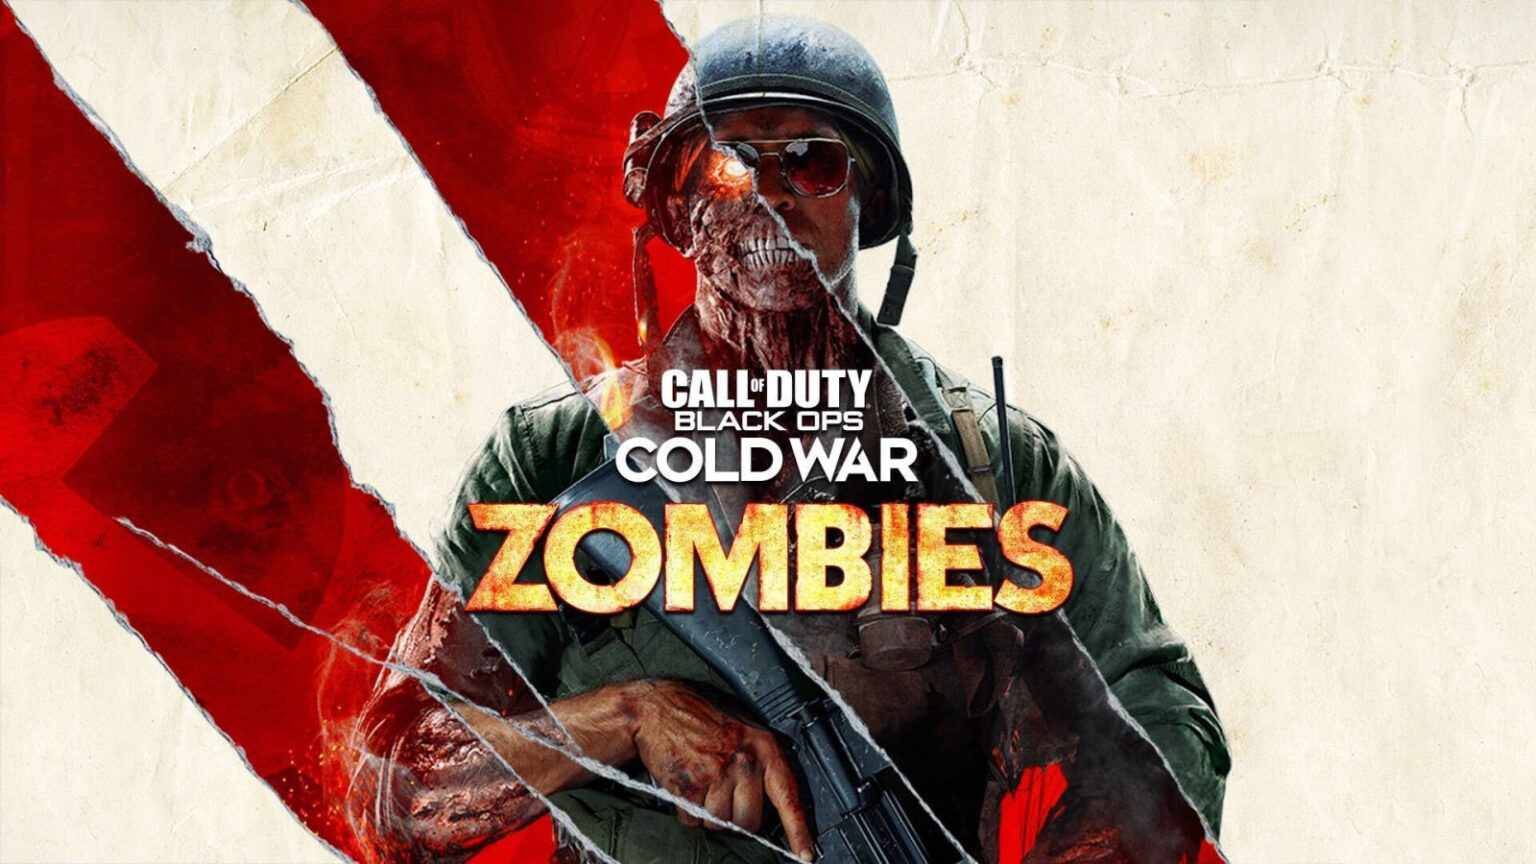 call of duty black ops cold war zombies trailer